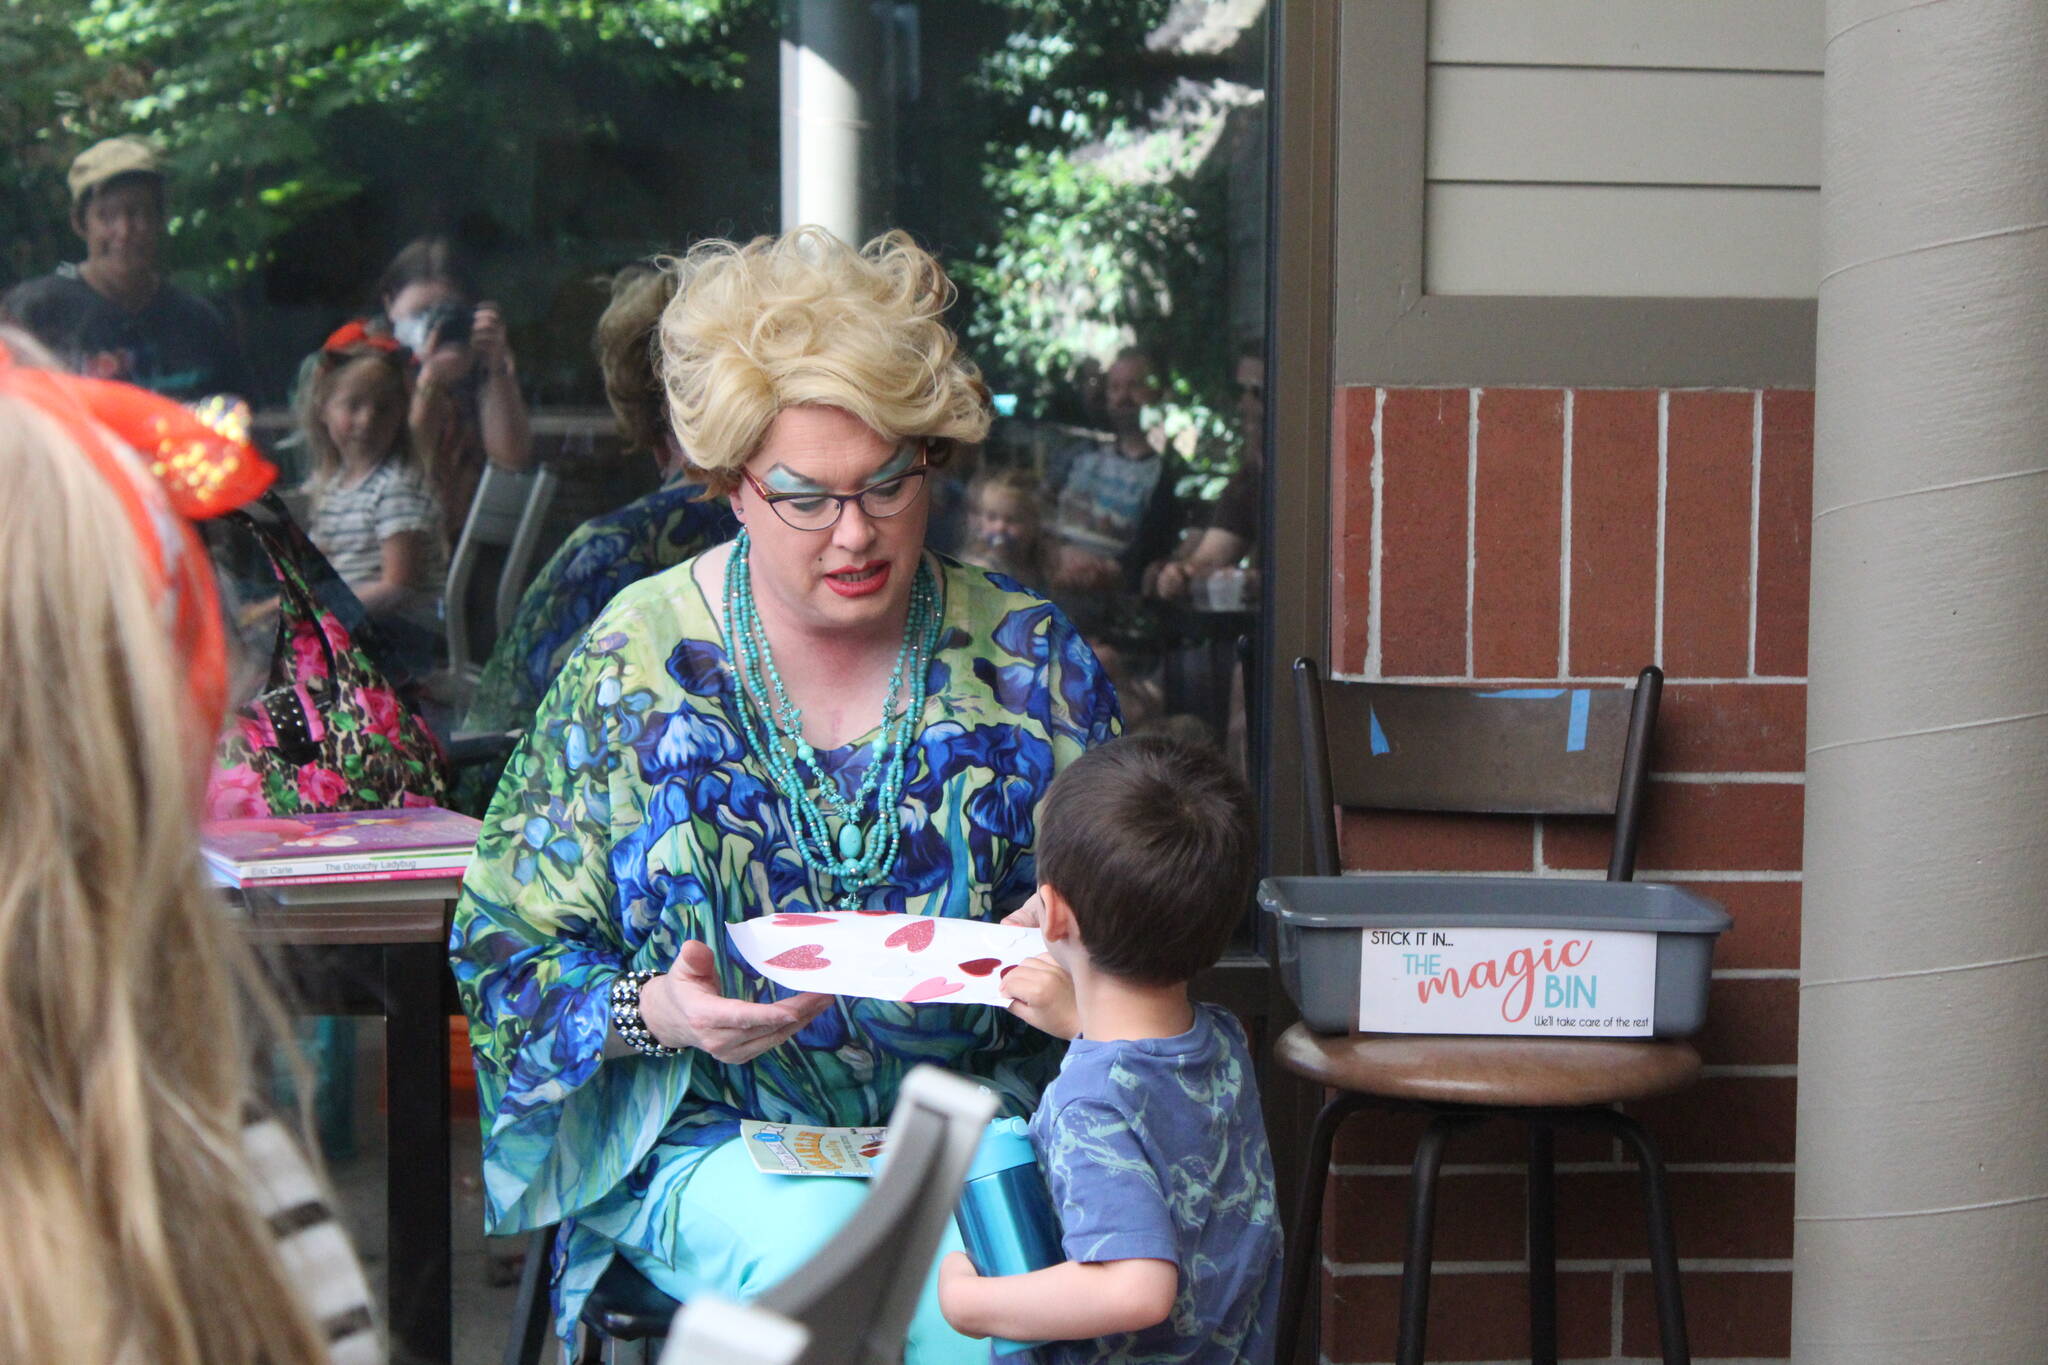 Sylvia receives a homemade card from one of the kids at Drag Queen Storytime. Photo by Bailey Jo Josie/Sound Publishing.